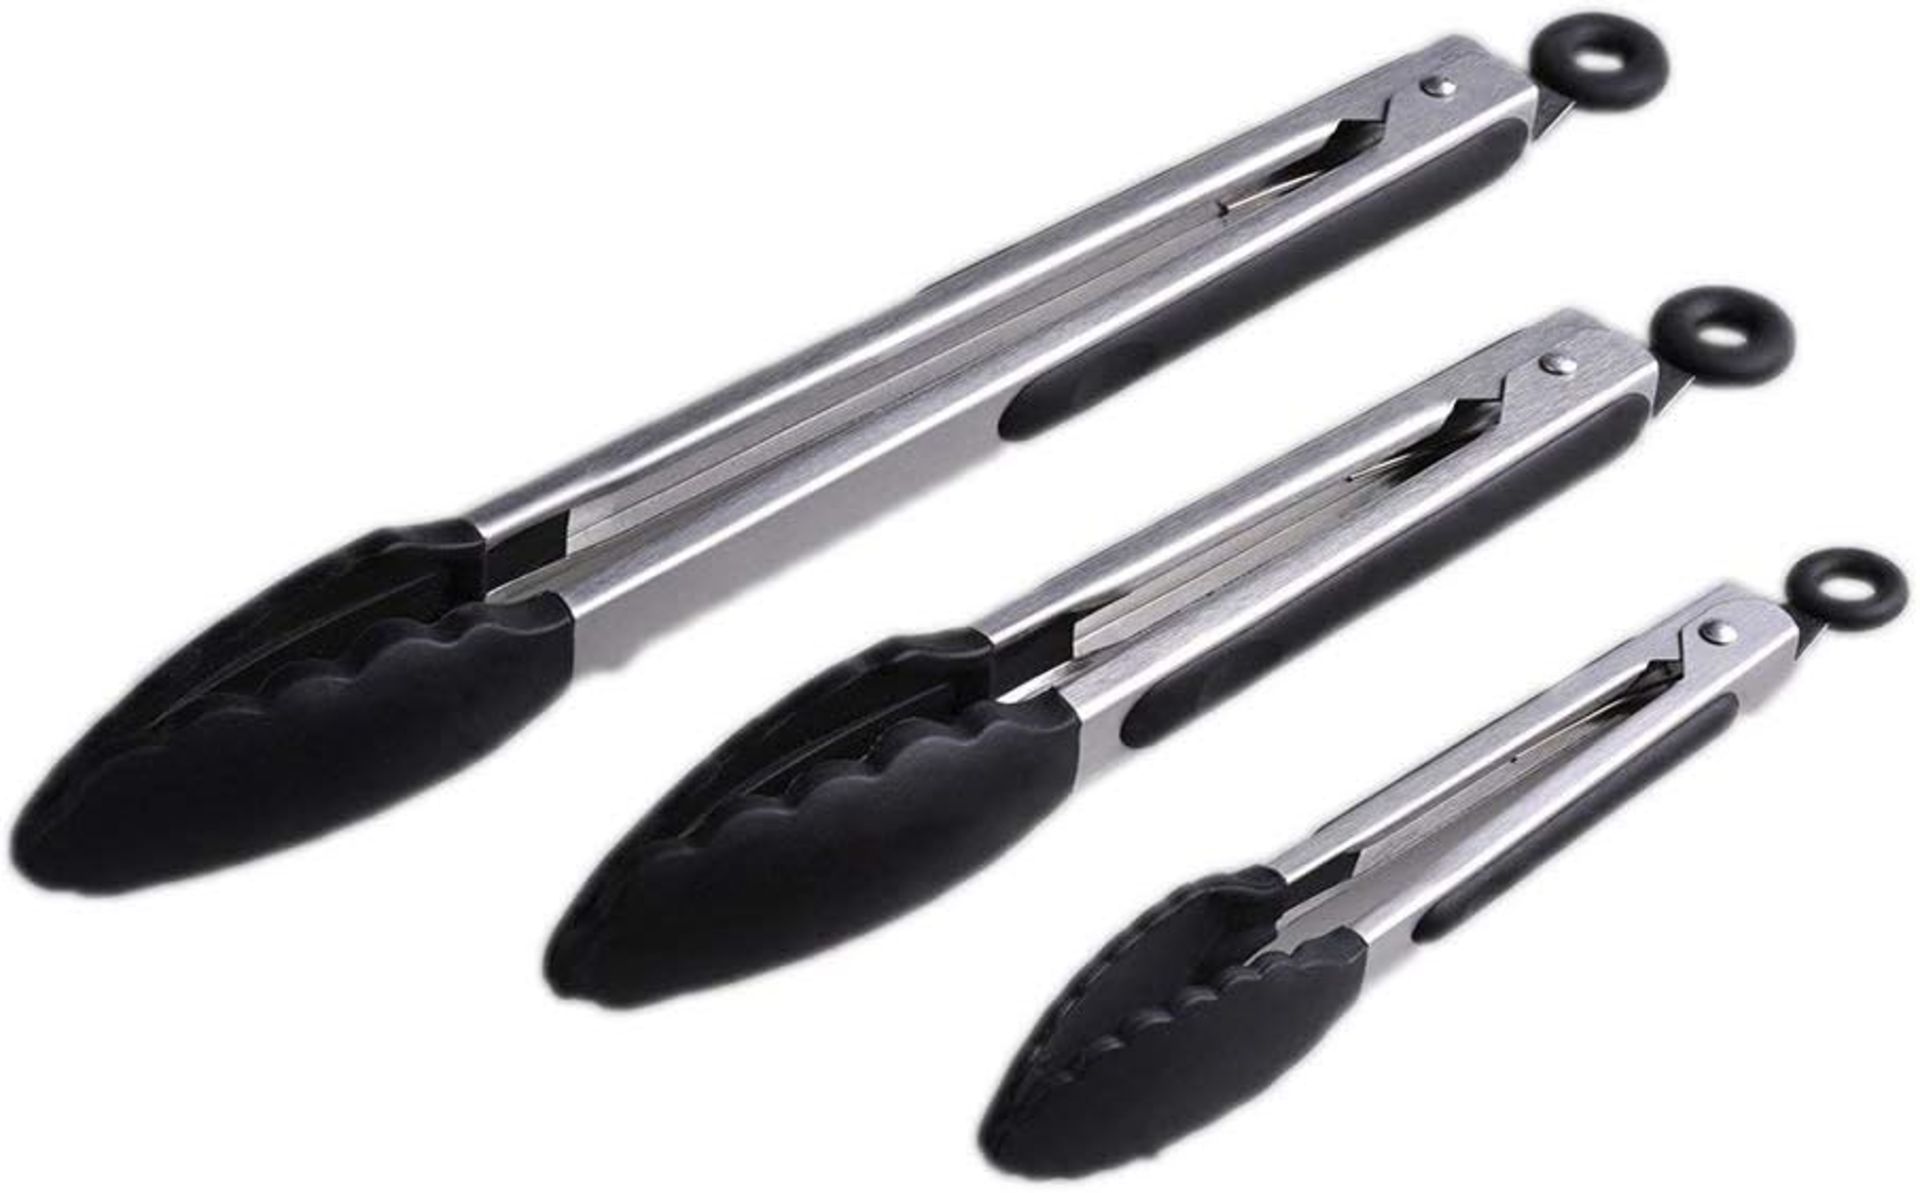 RRP £36 Set of 3 x 3-Pieces Smithcraft Kitchen Barbecue Tongs Set 18/8 (304) Stainless Steel Cooking